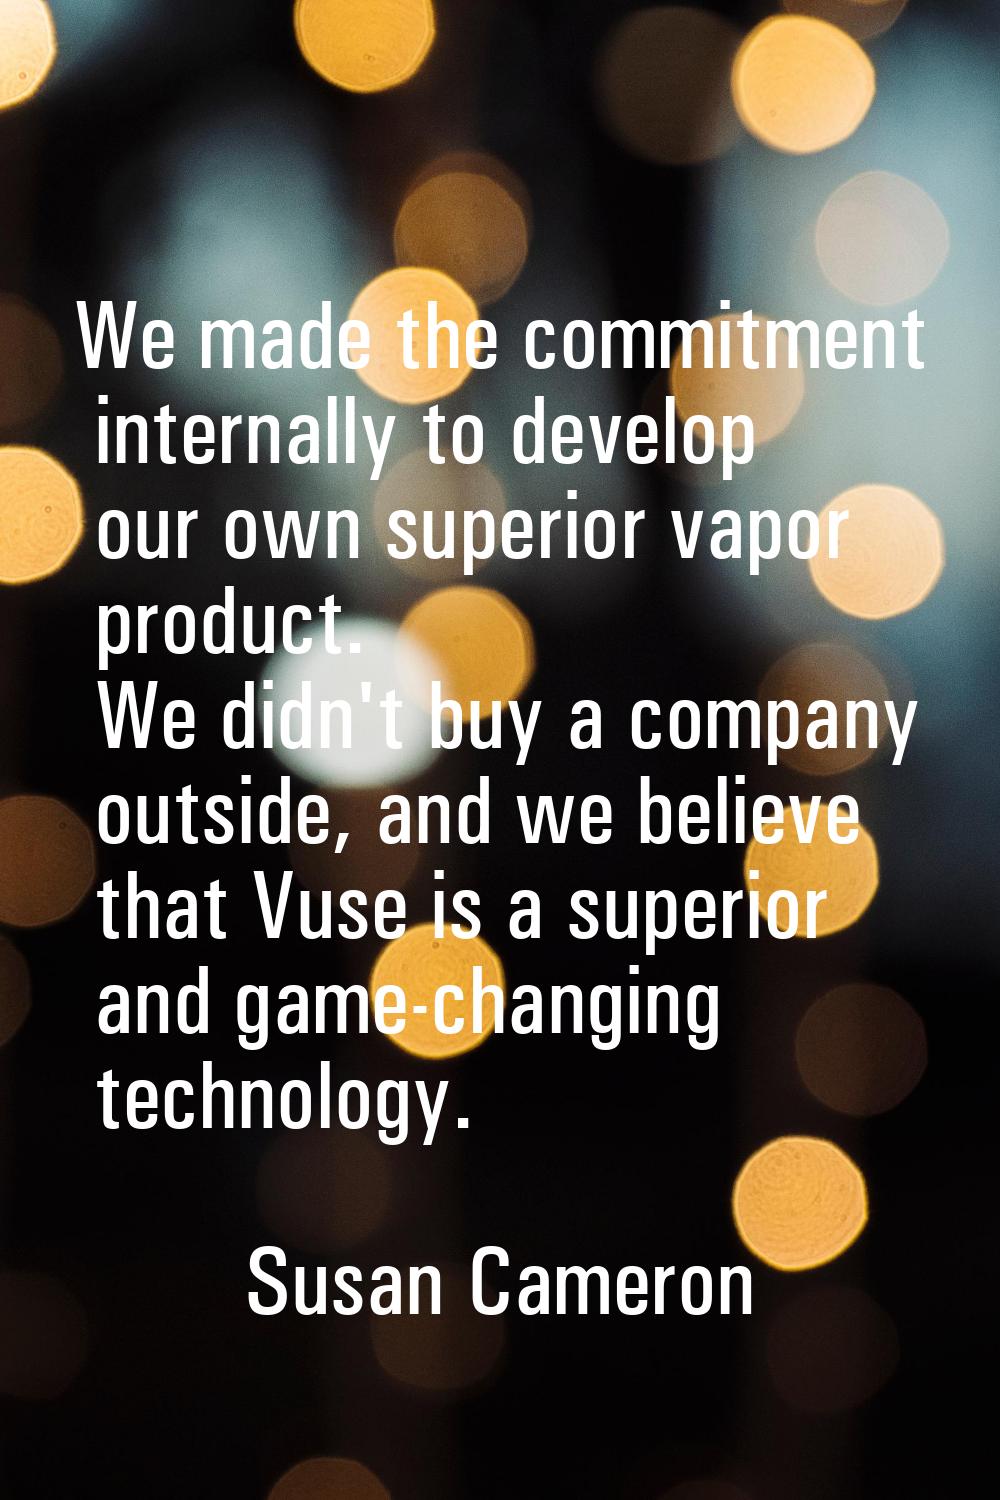 We made the commitment internally to develop our own superior vapor product. We didn't buy a compan